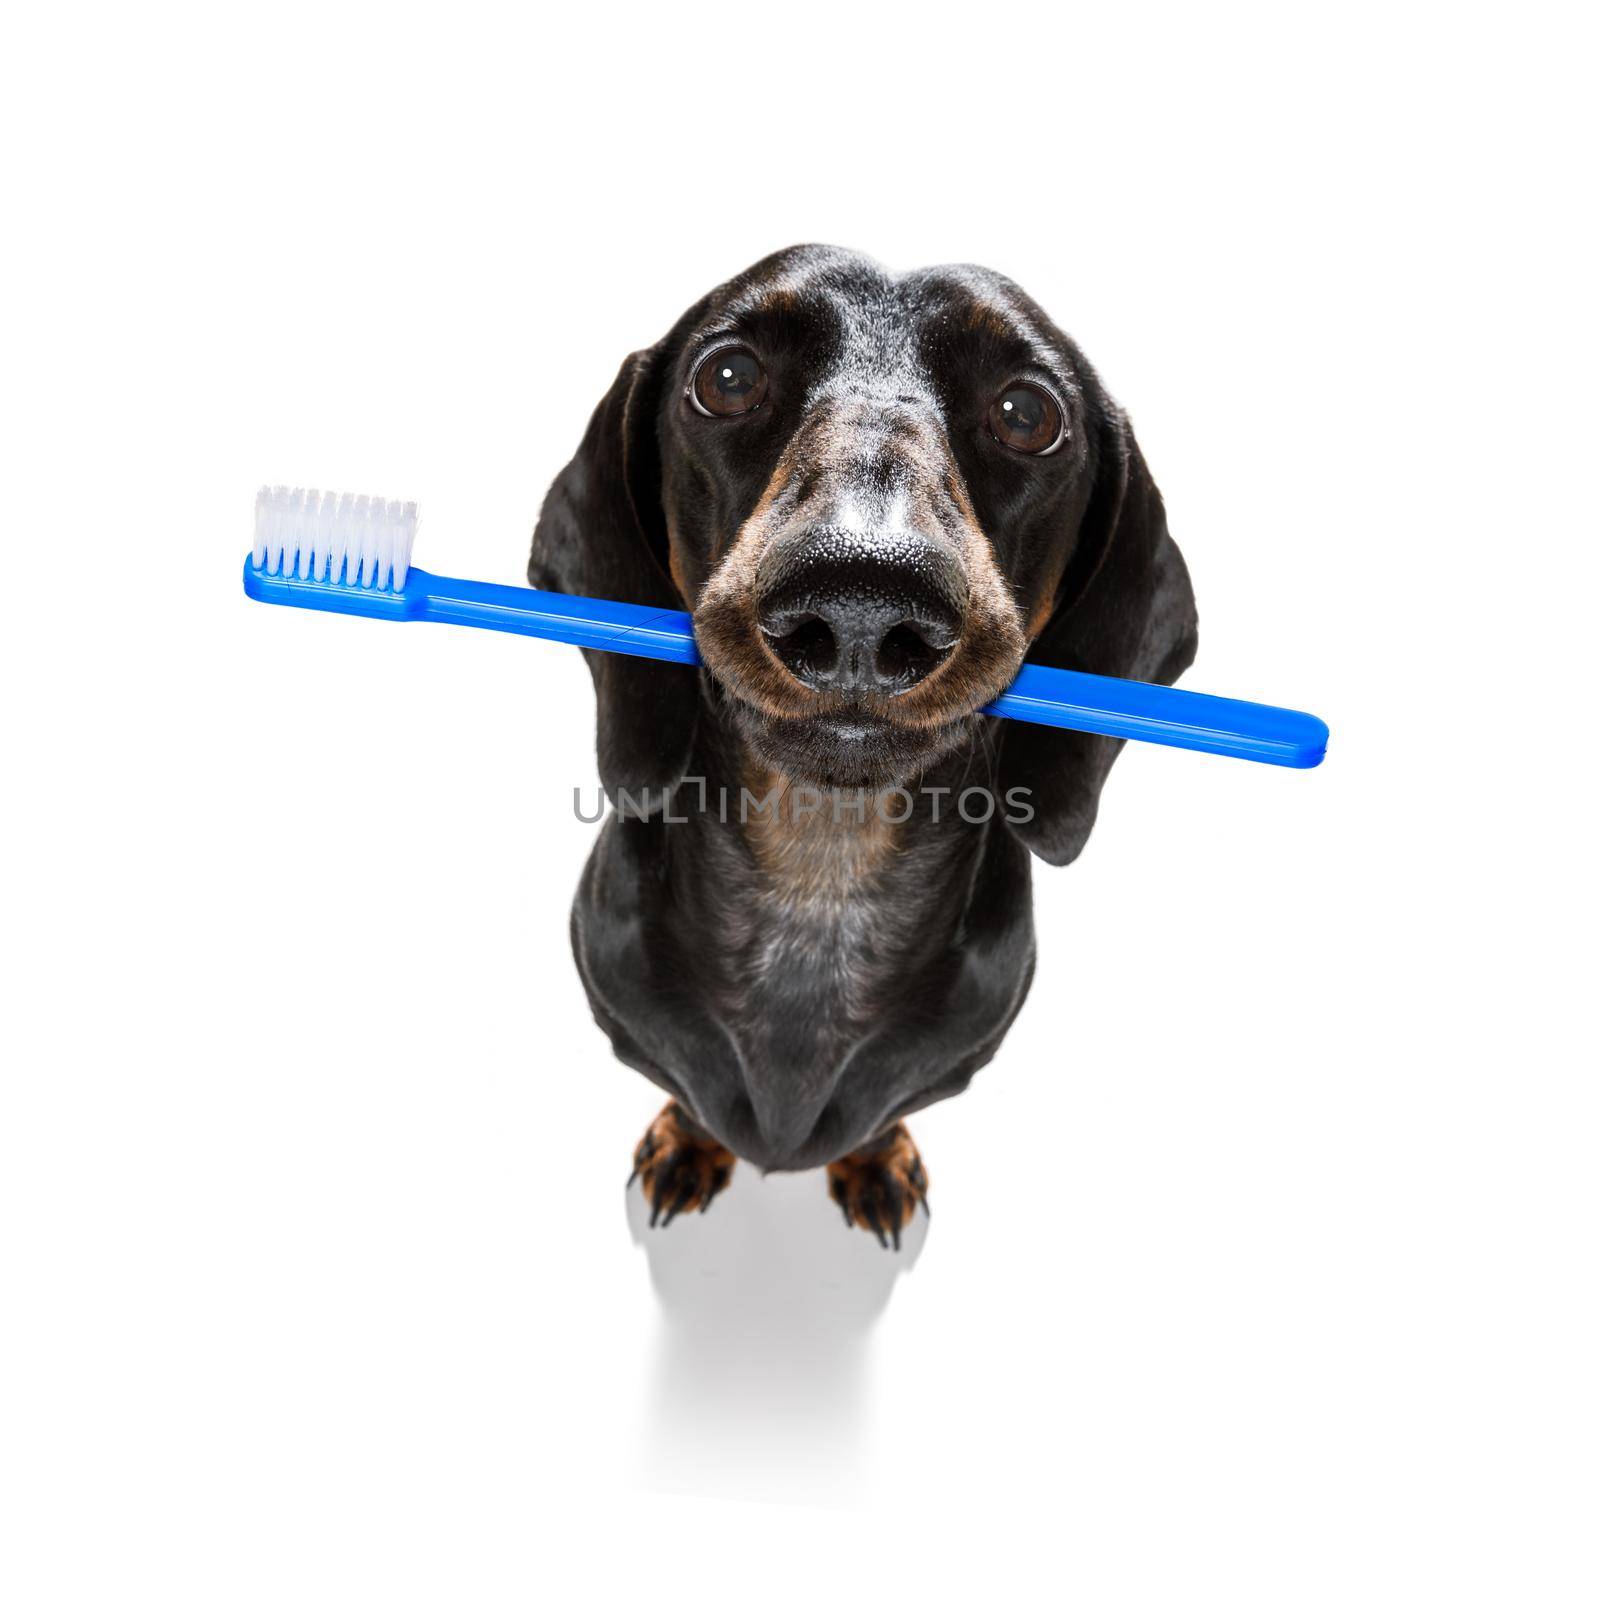 sausage dachshund dog holding a toothbrush with mouth , isolated on white background